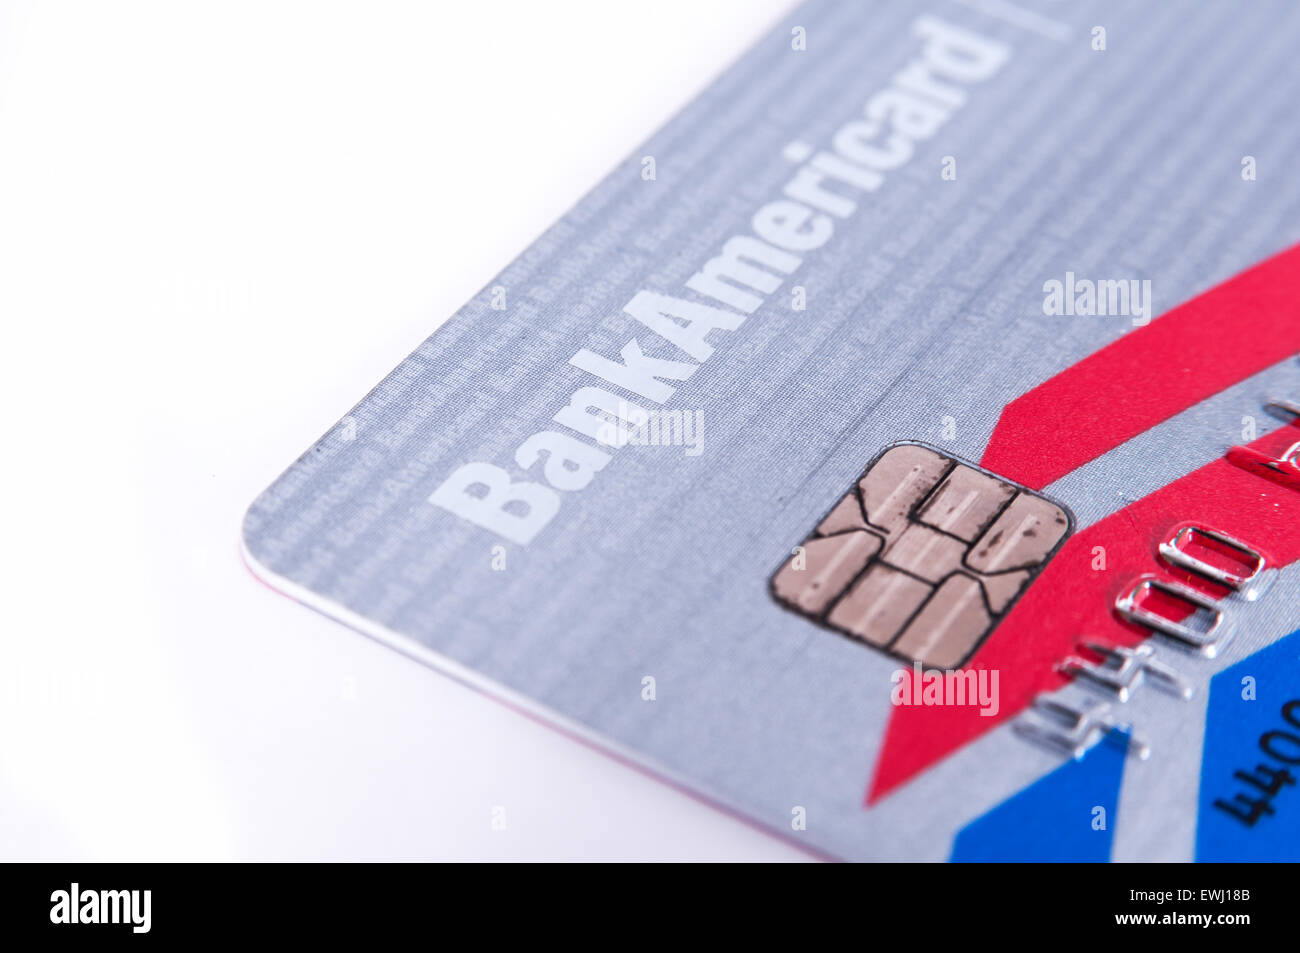 Bank of america cash rewards credit card close up on white background Stock Photo